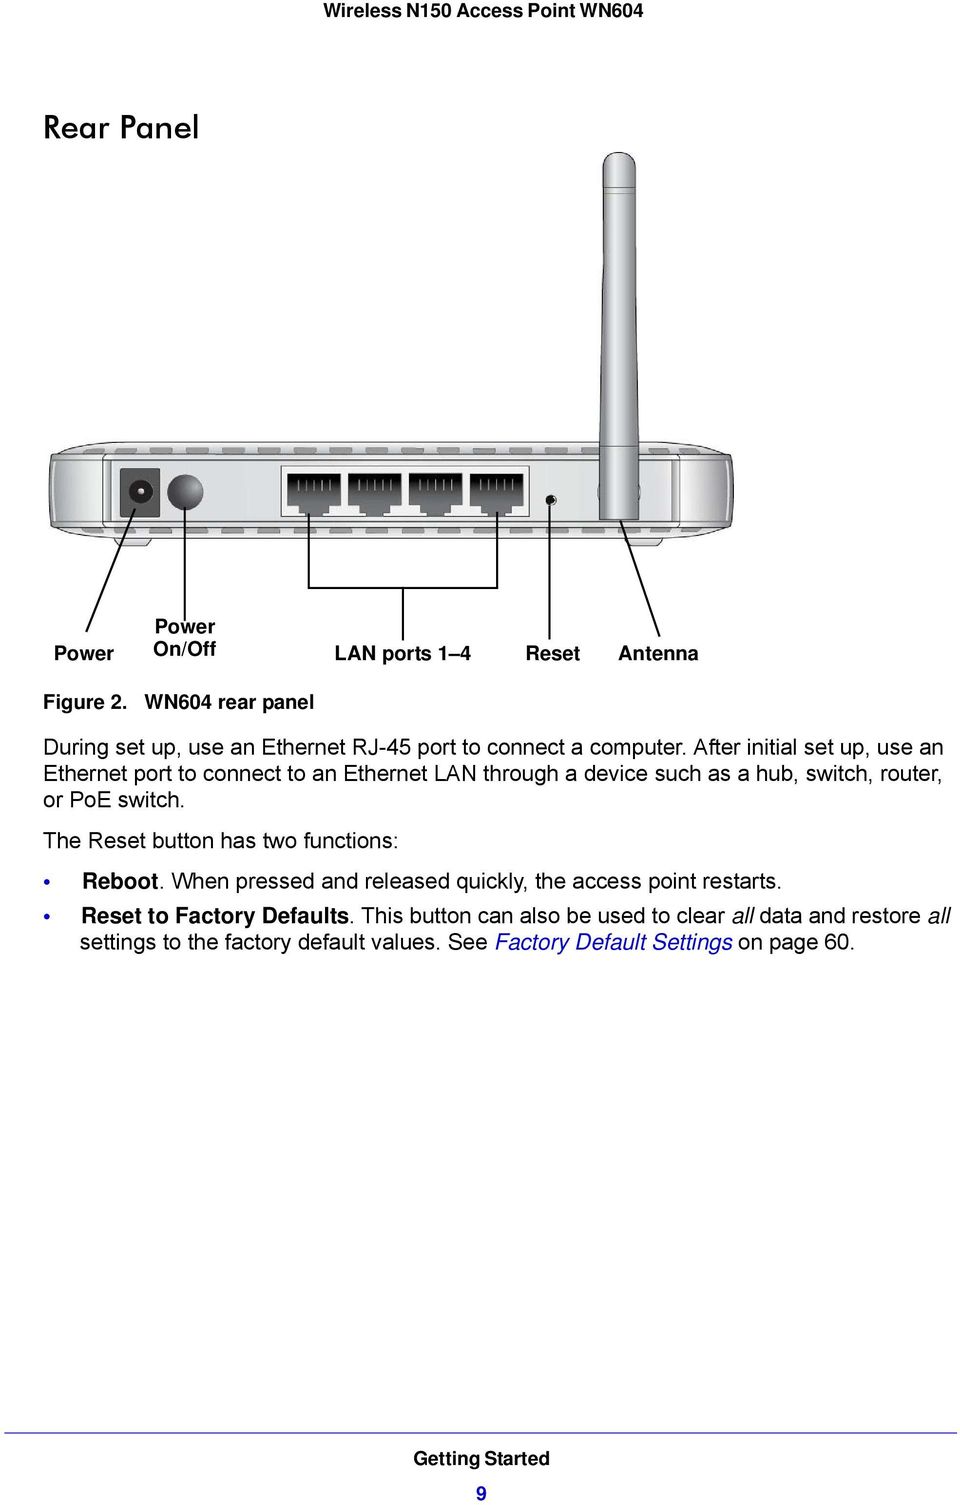 After initial set up, use an Ethernet port to connect to an Ethernet LAN through a device such as a hub, switch, router, or PoE switch.